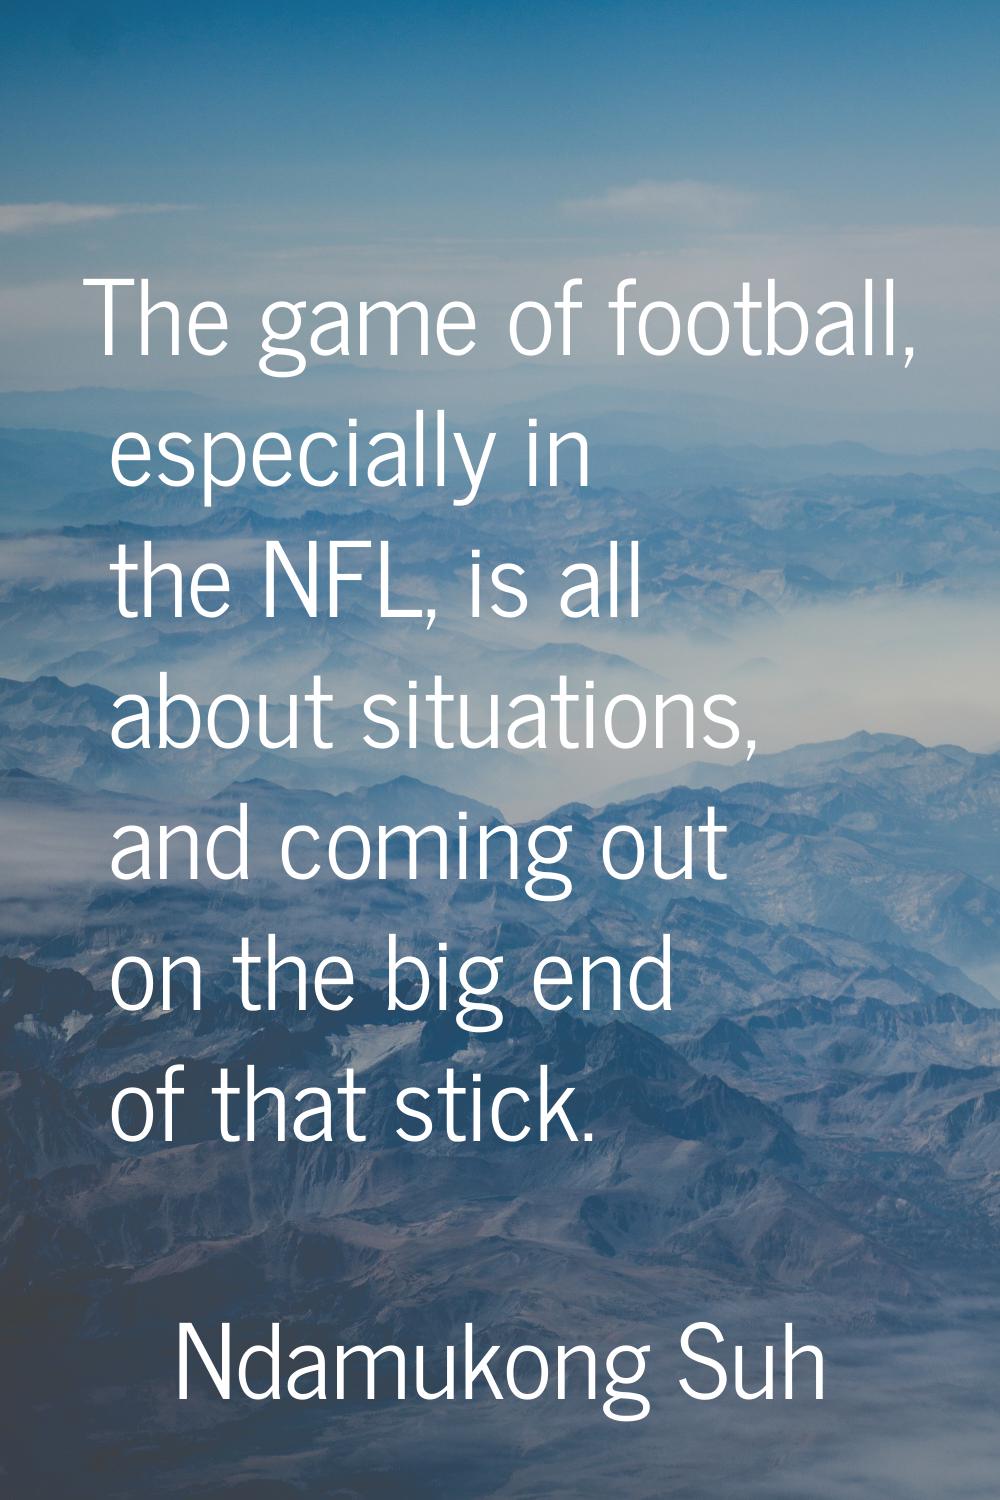 The game of football, especially in the NFL, is all about situations, and coming out on the big end